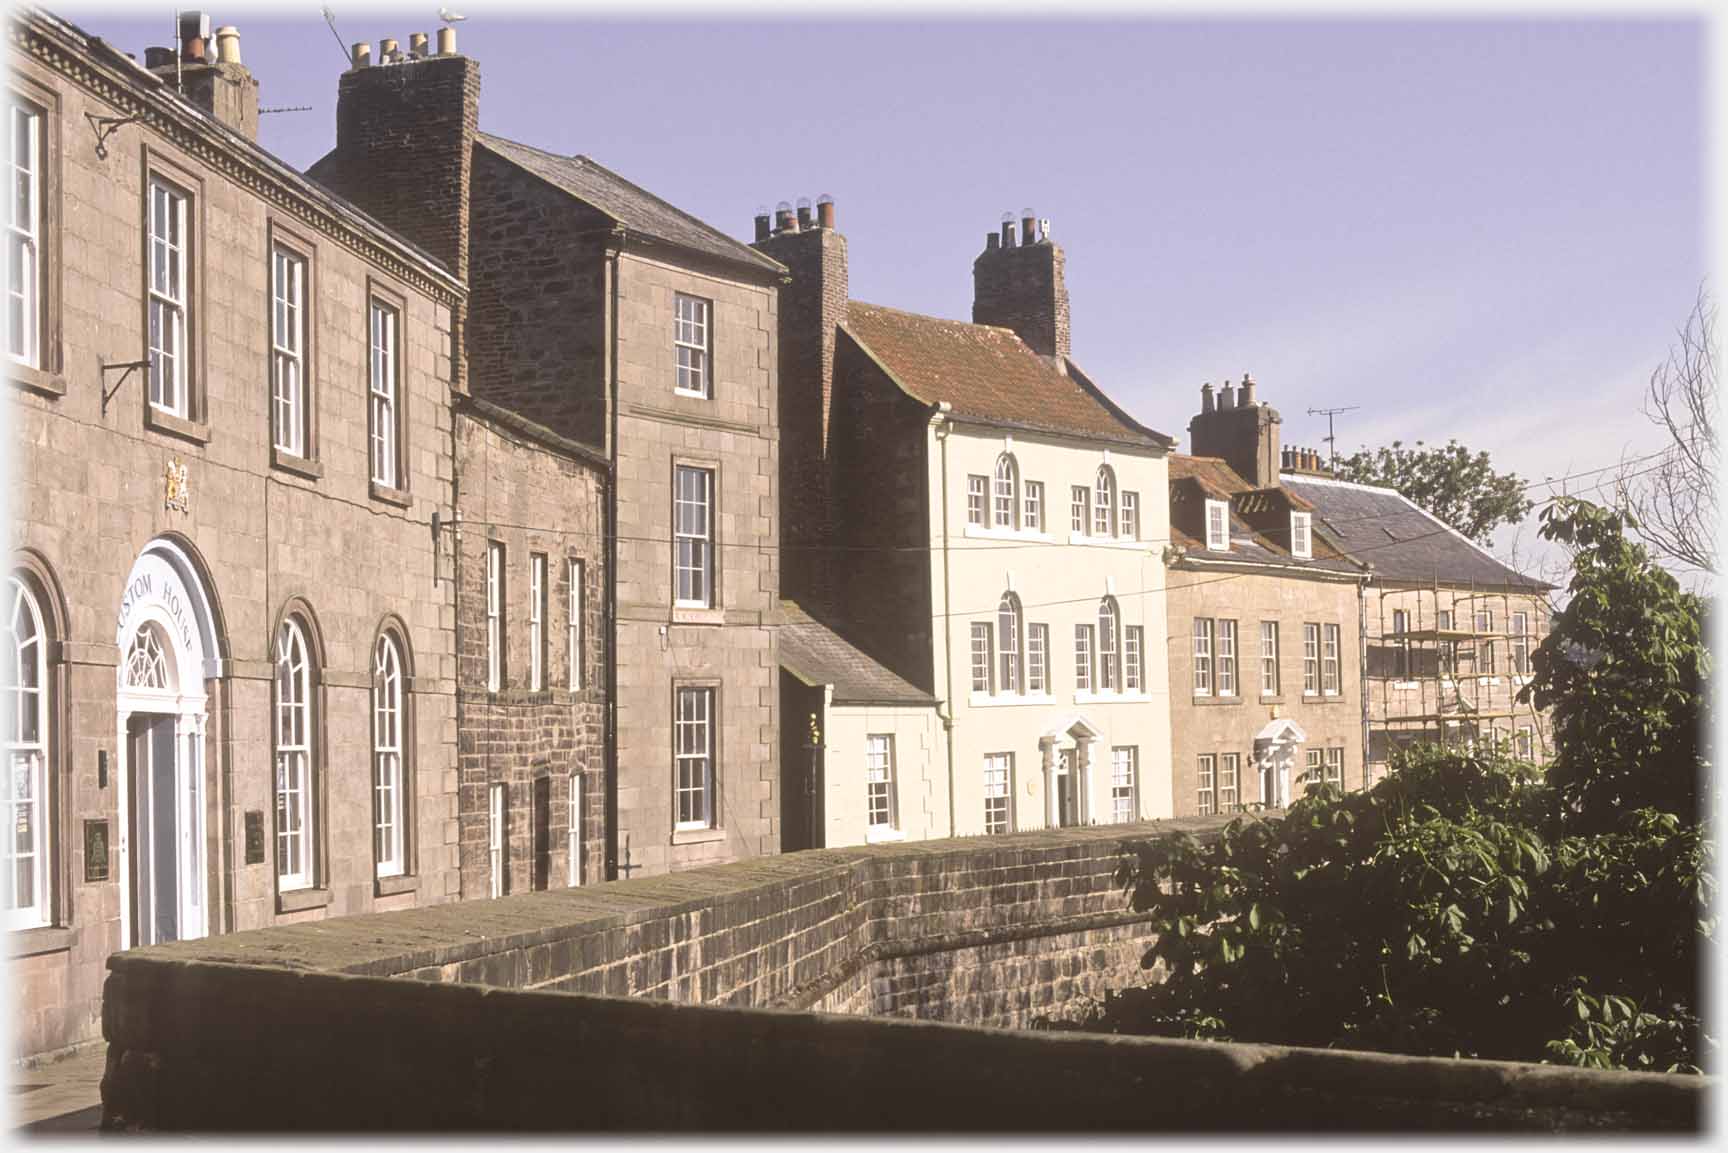 Row of Georgian windowed houses with wall in front.